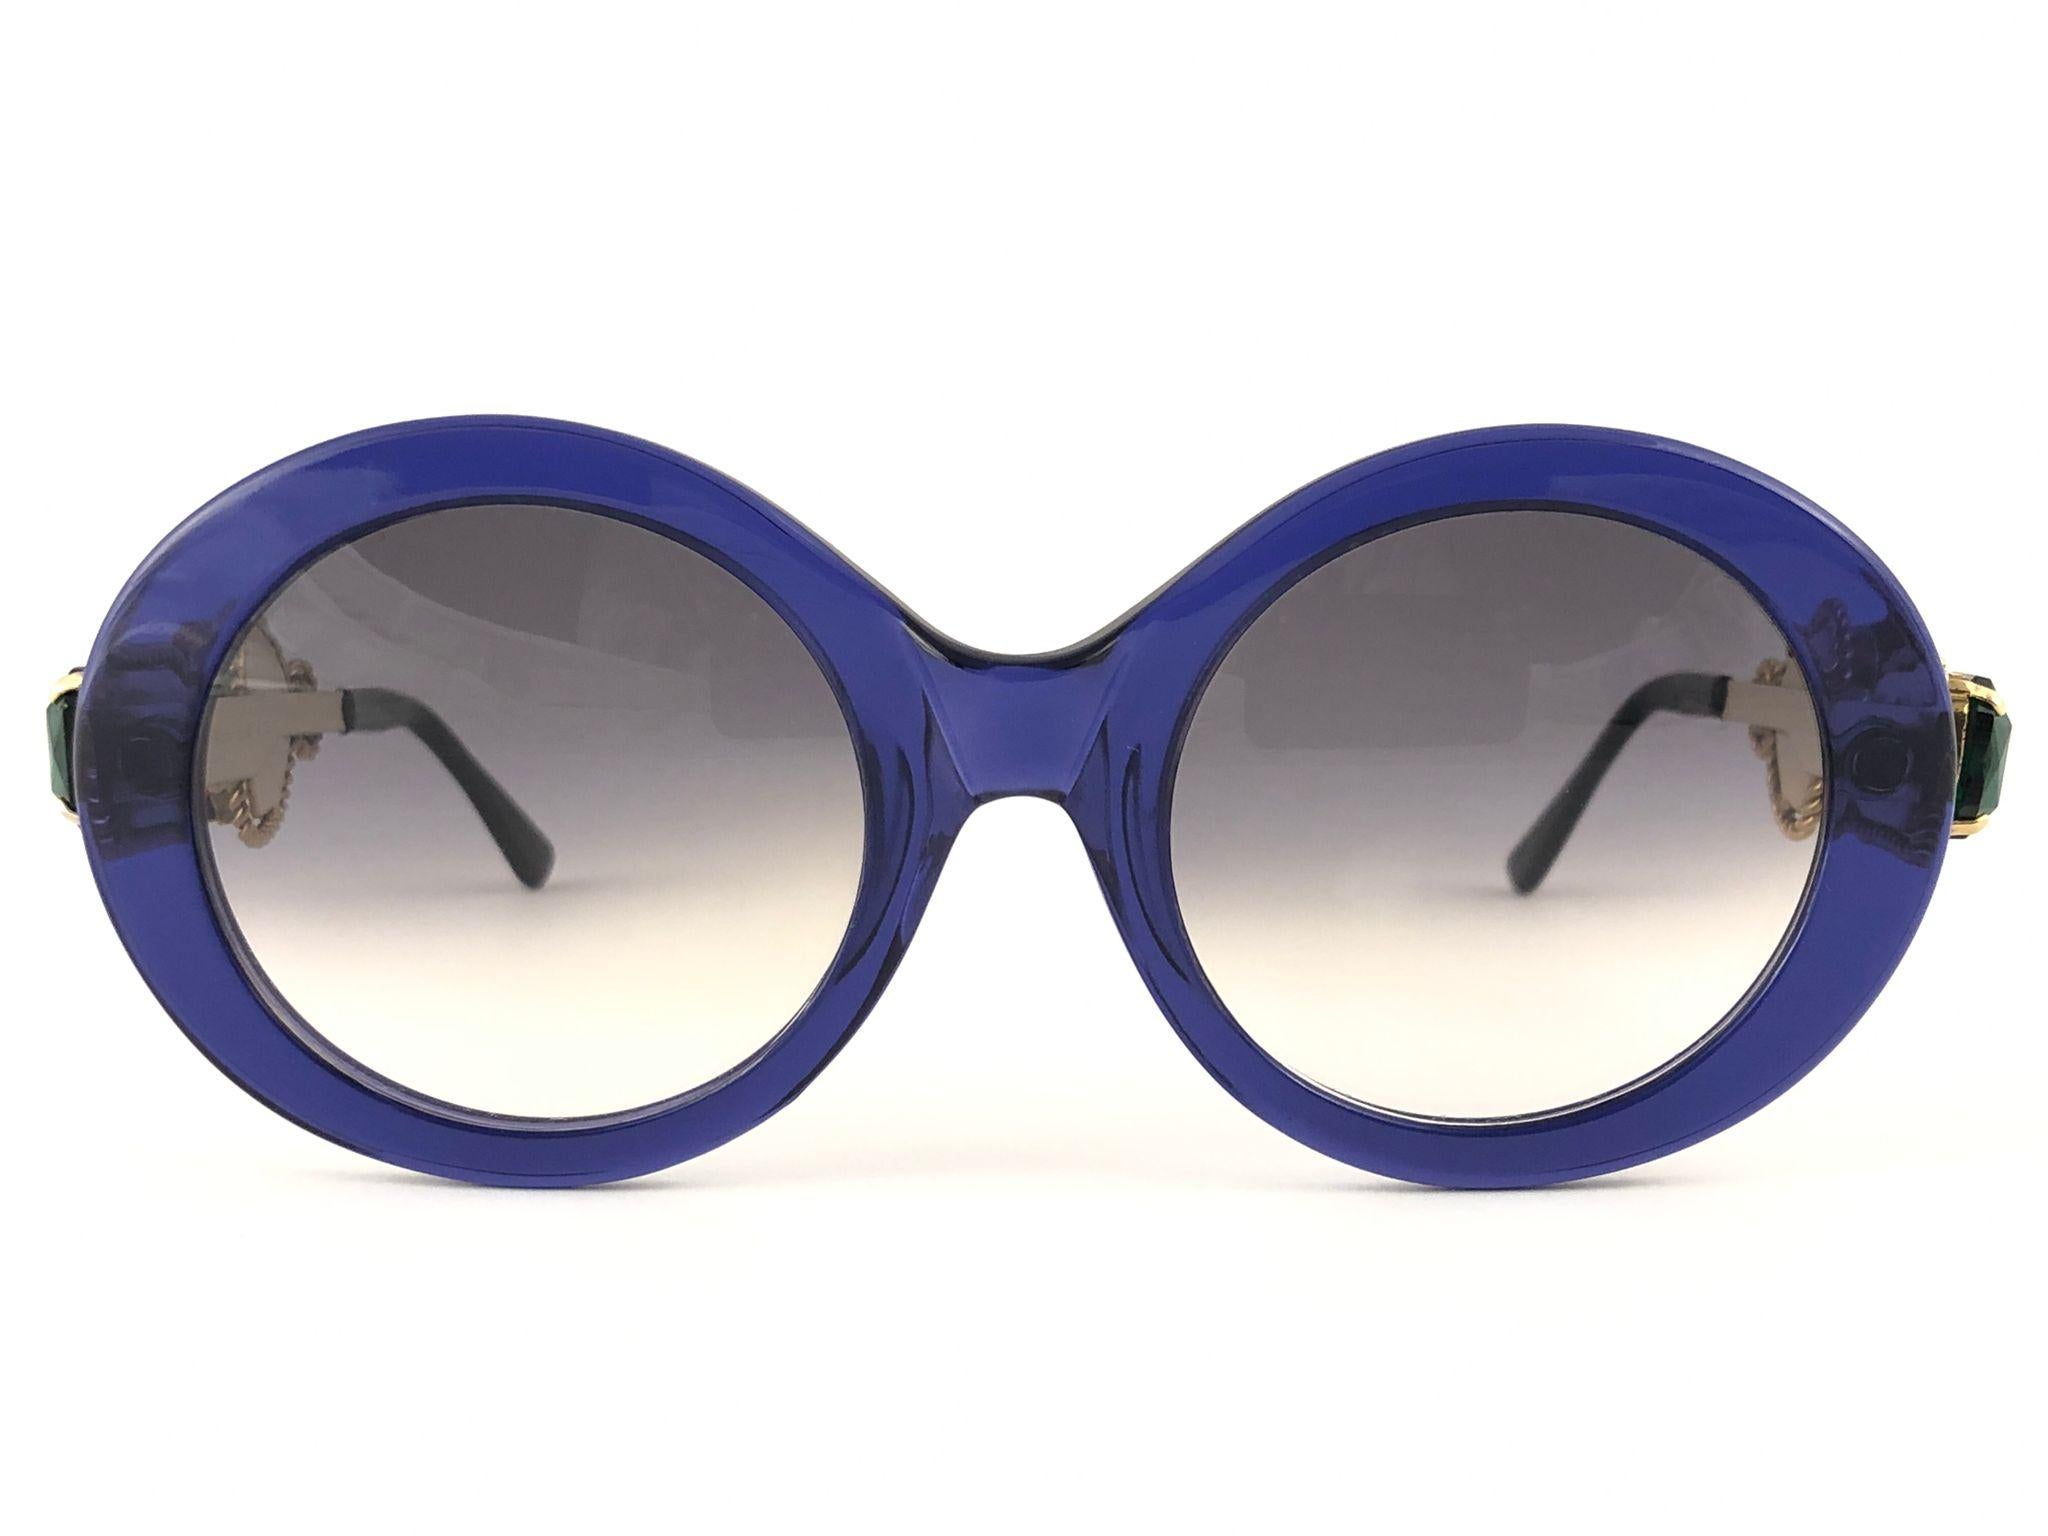 Rare Vintage Moschino oval with jewell details frame. Grey lenses.
The very same model worn by Lady Gaga.

Made in Italy.

FRONT : 13.5 CMS

LENS HEIGHT : 4.6 CMS

LENS WIDTH : 4.8 CMS

This item show minor wear on the frame due to storage.